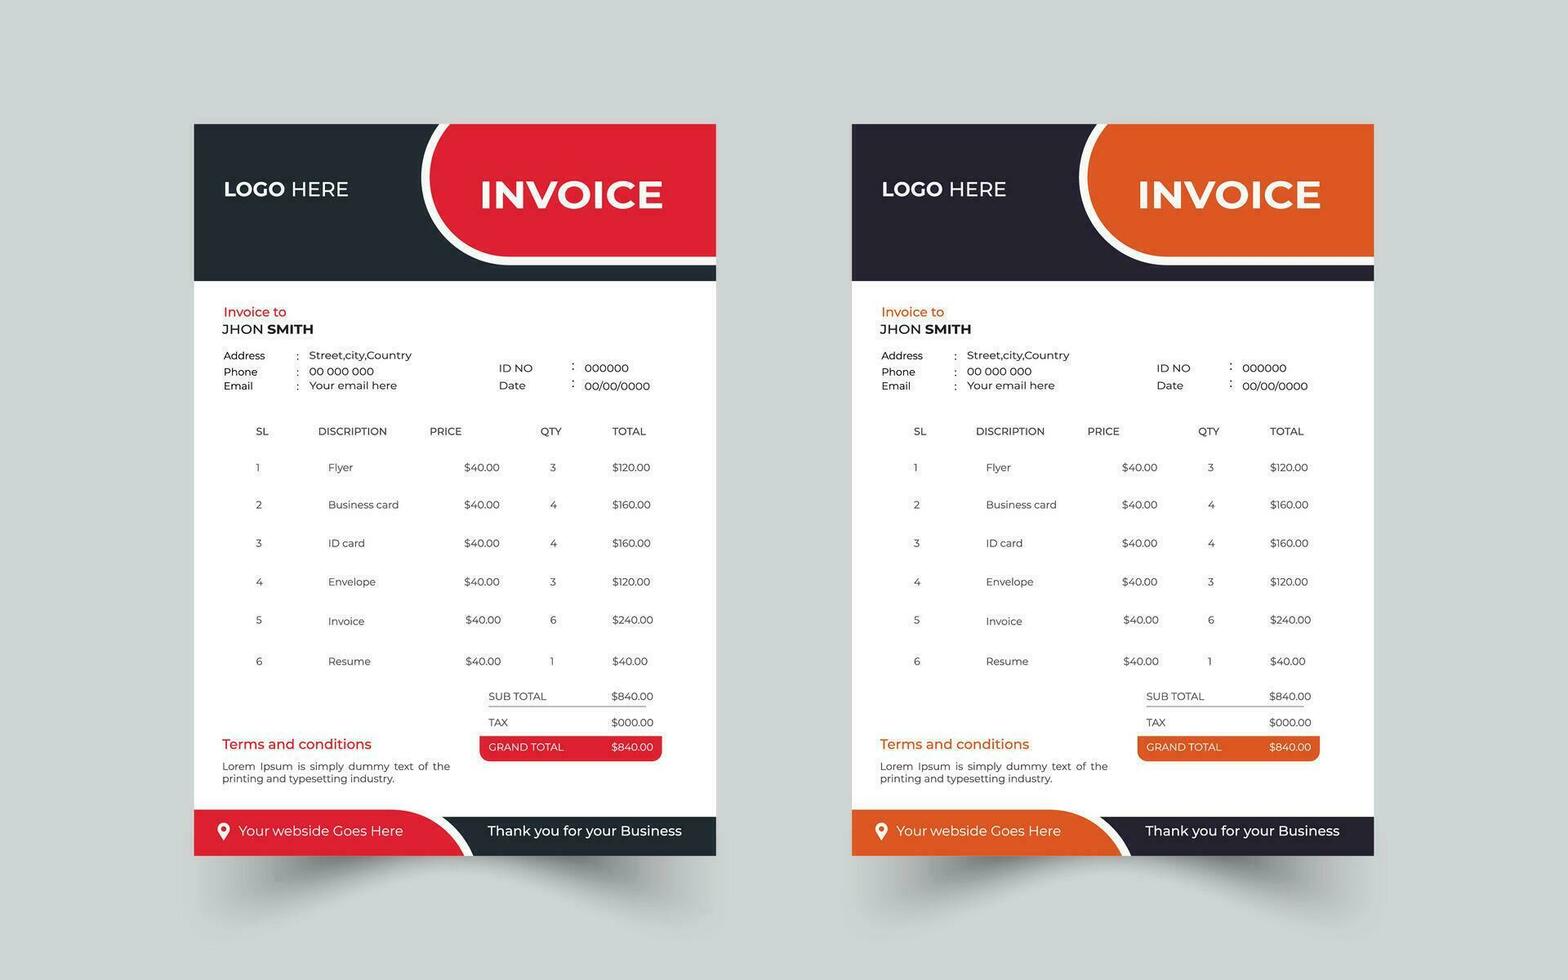 Invoice minimal design template,modern and professional minimal business invoice template vector